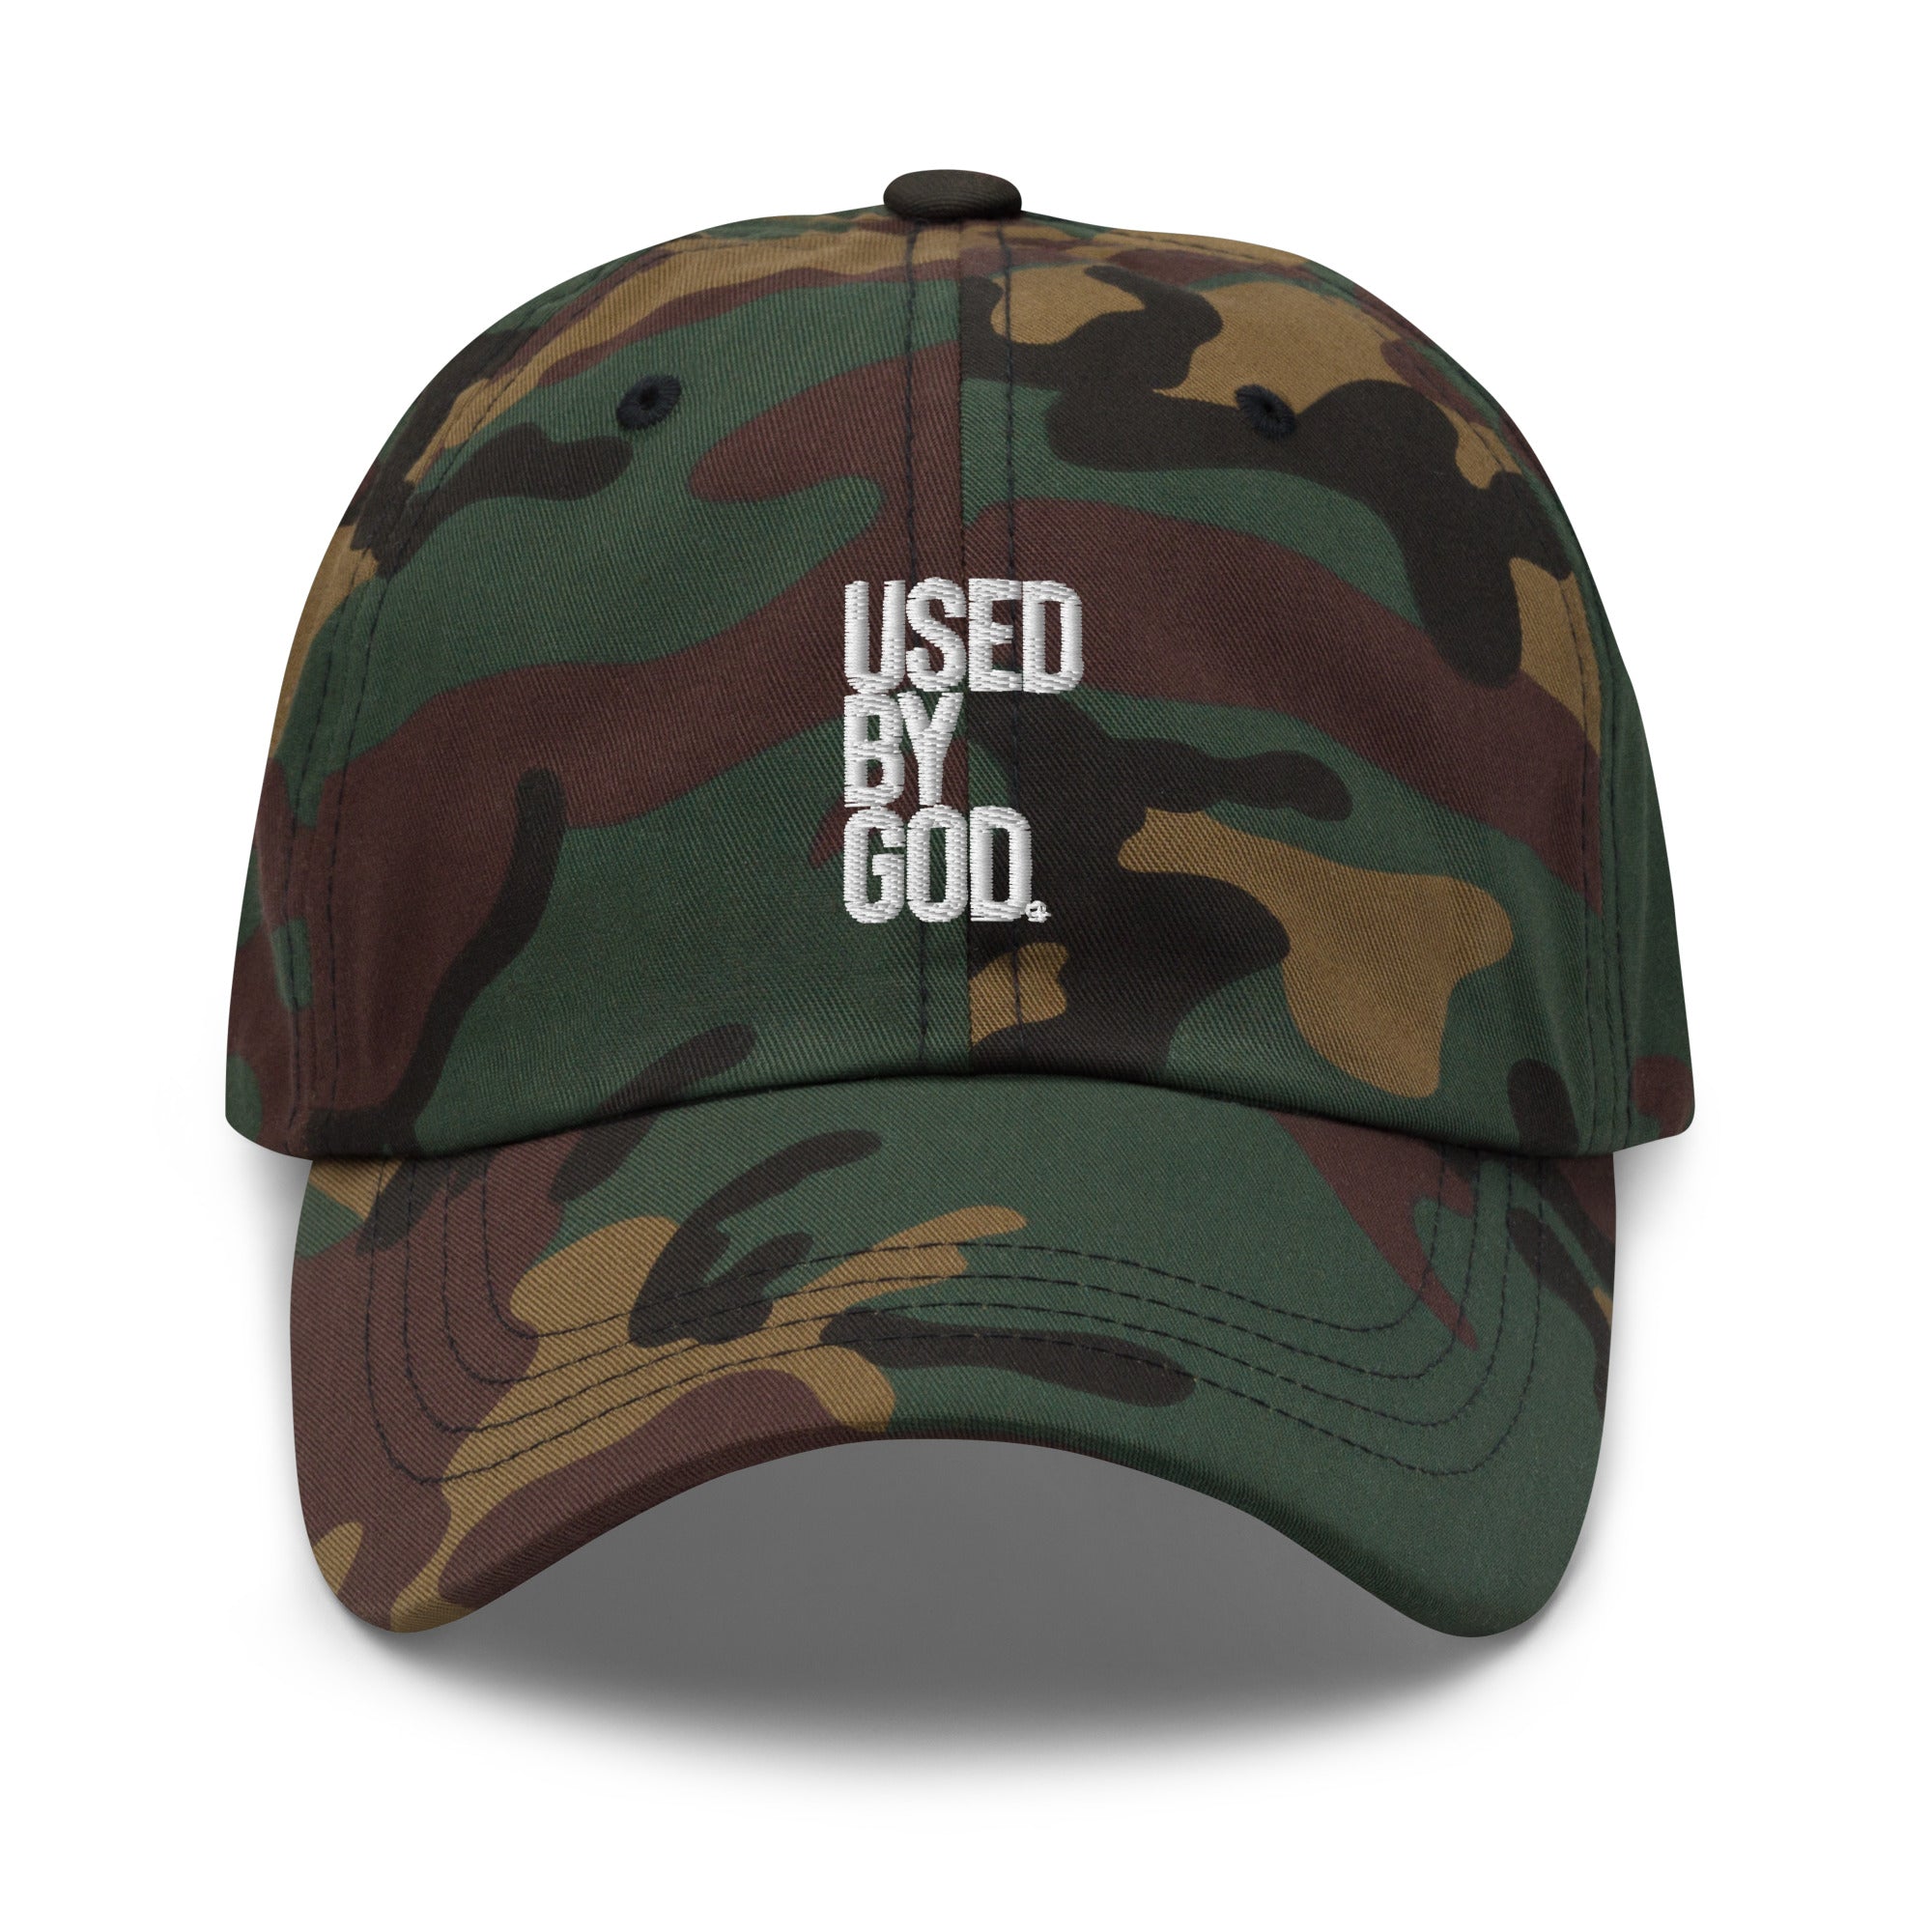 UBG Logo Camo Dad Hat, Used By God, Used By God Clothing, Christian Apparel, Christian Hats, Christian T-Shirts, Christian Clothing, God Shirts, Christian Sweatshirts, God Clothing, Jesus Hoodie, Jesus Clothes, God Is Dope, Art Of Homage, Red Letter Clothing, Elevated Faith, Active Faith Sports, Beacon Threads, God The Father Apparel